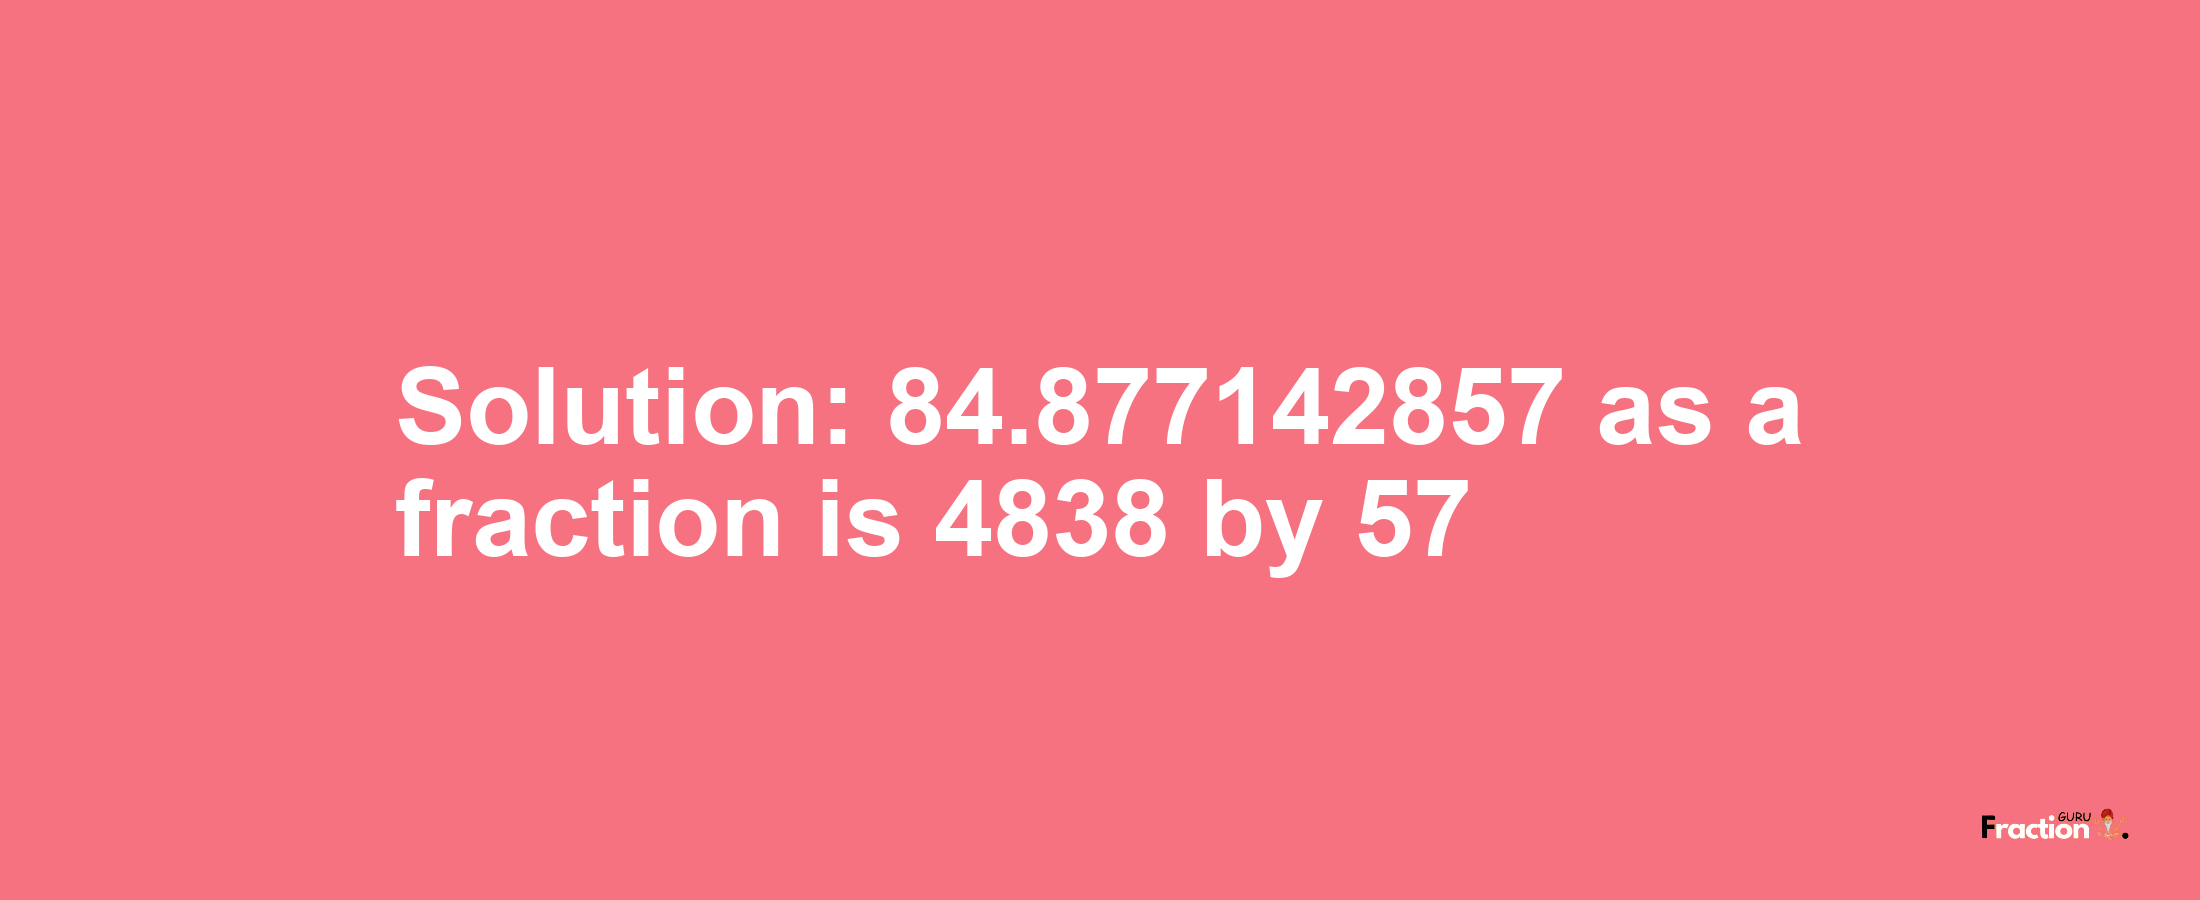 Solution:84.877142857 as a fraction is 4838/57